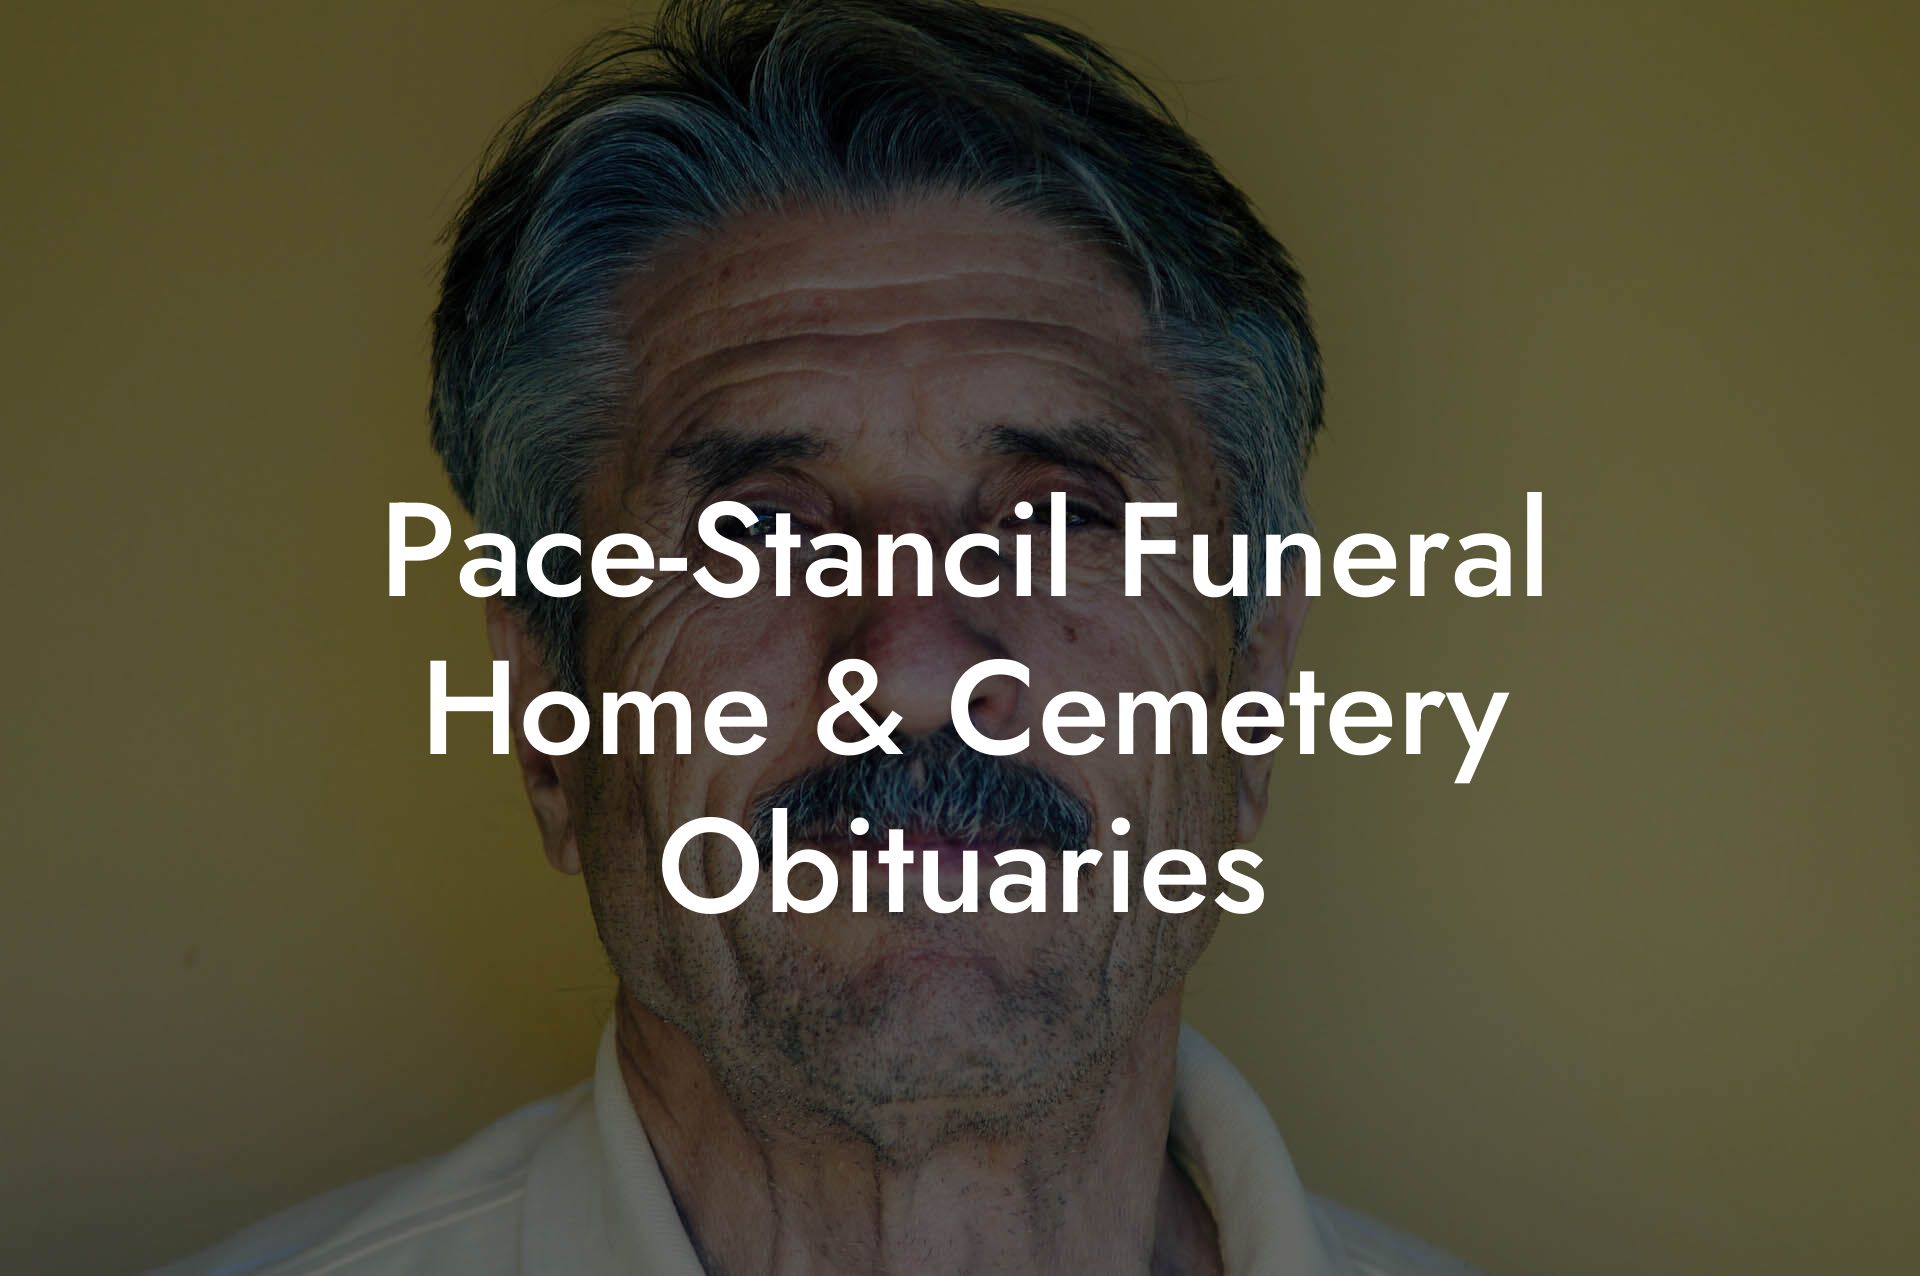 Pace-Stancil Funeral Home & Cemetery Obituaries